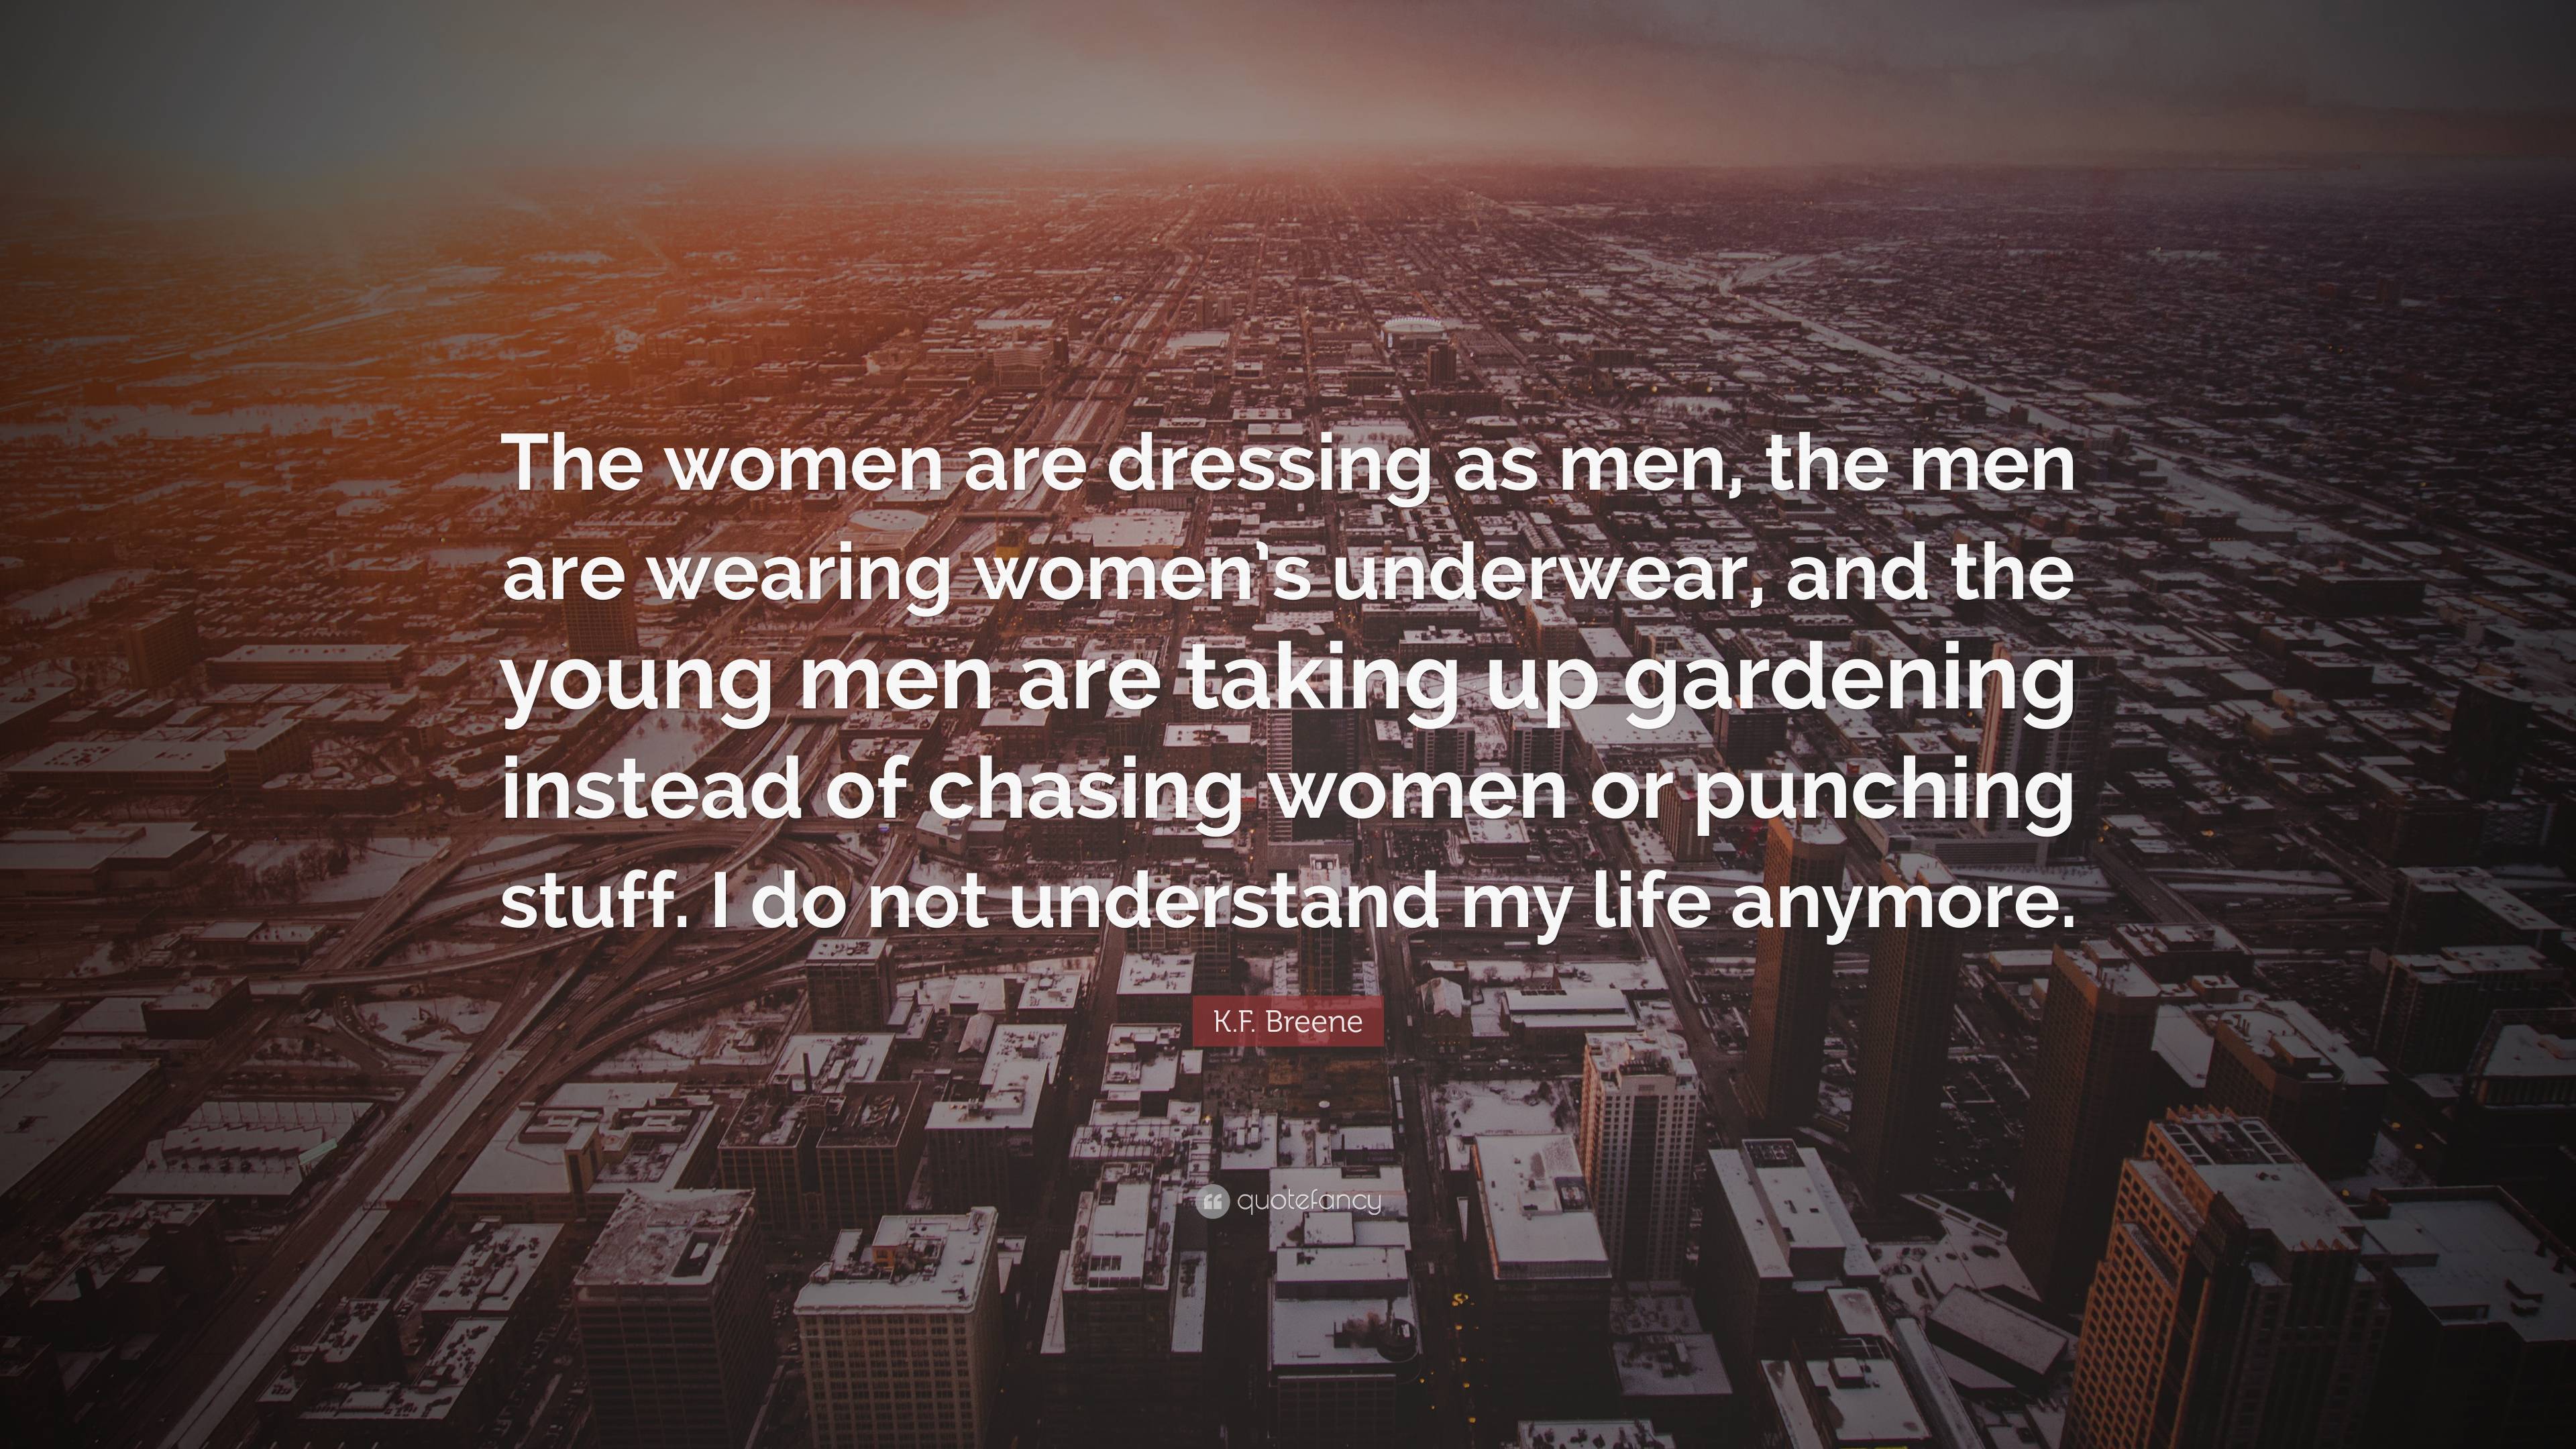 K.F. Breene Quote: “The women are dressing as men, the men are wearing  women's underwear, and the young men are taking up gardening instead ”